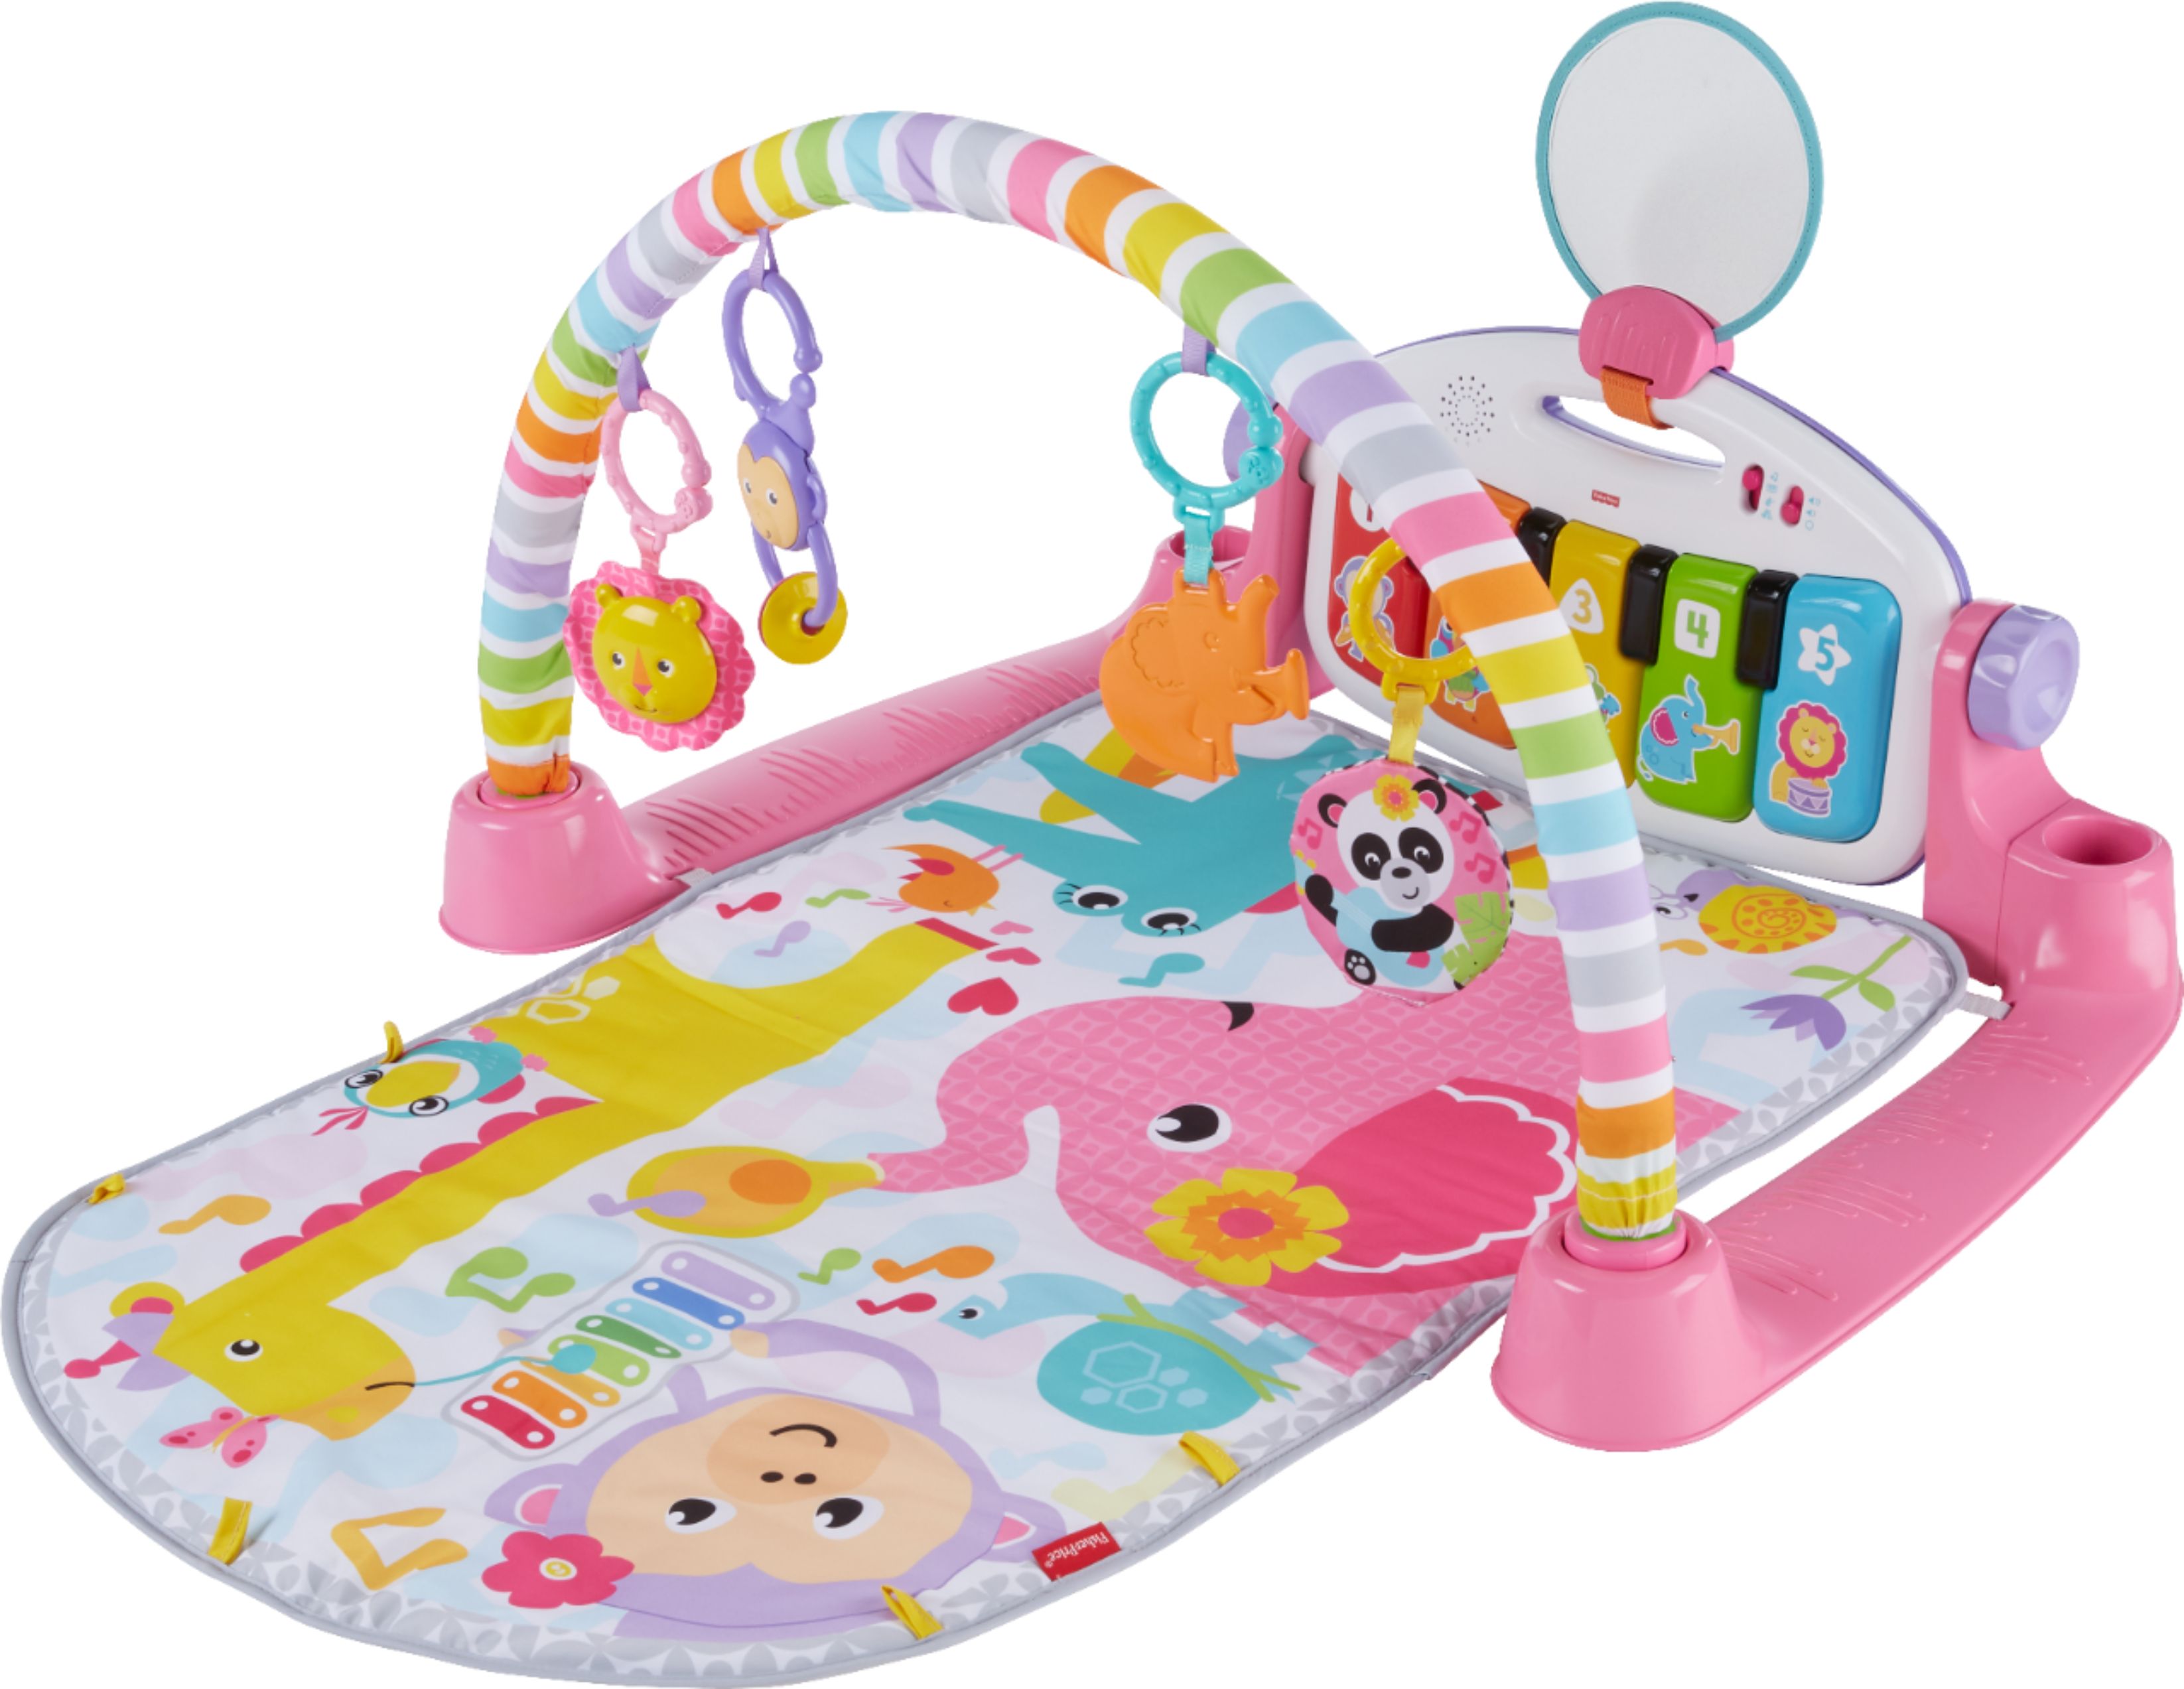 Left View: Fisher-Price - Deluxe Kick & Play Piano Gym - Pink/Yellow/White